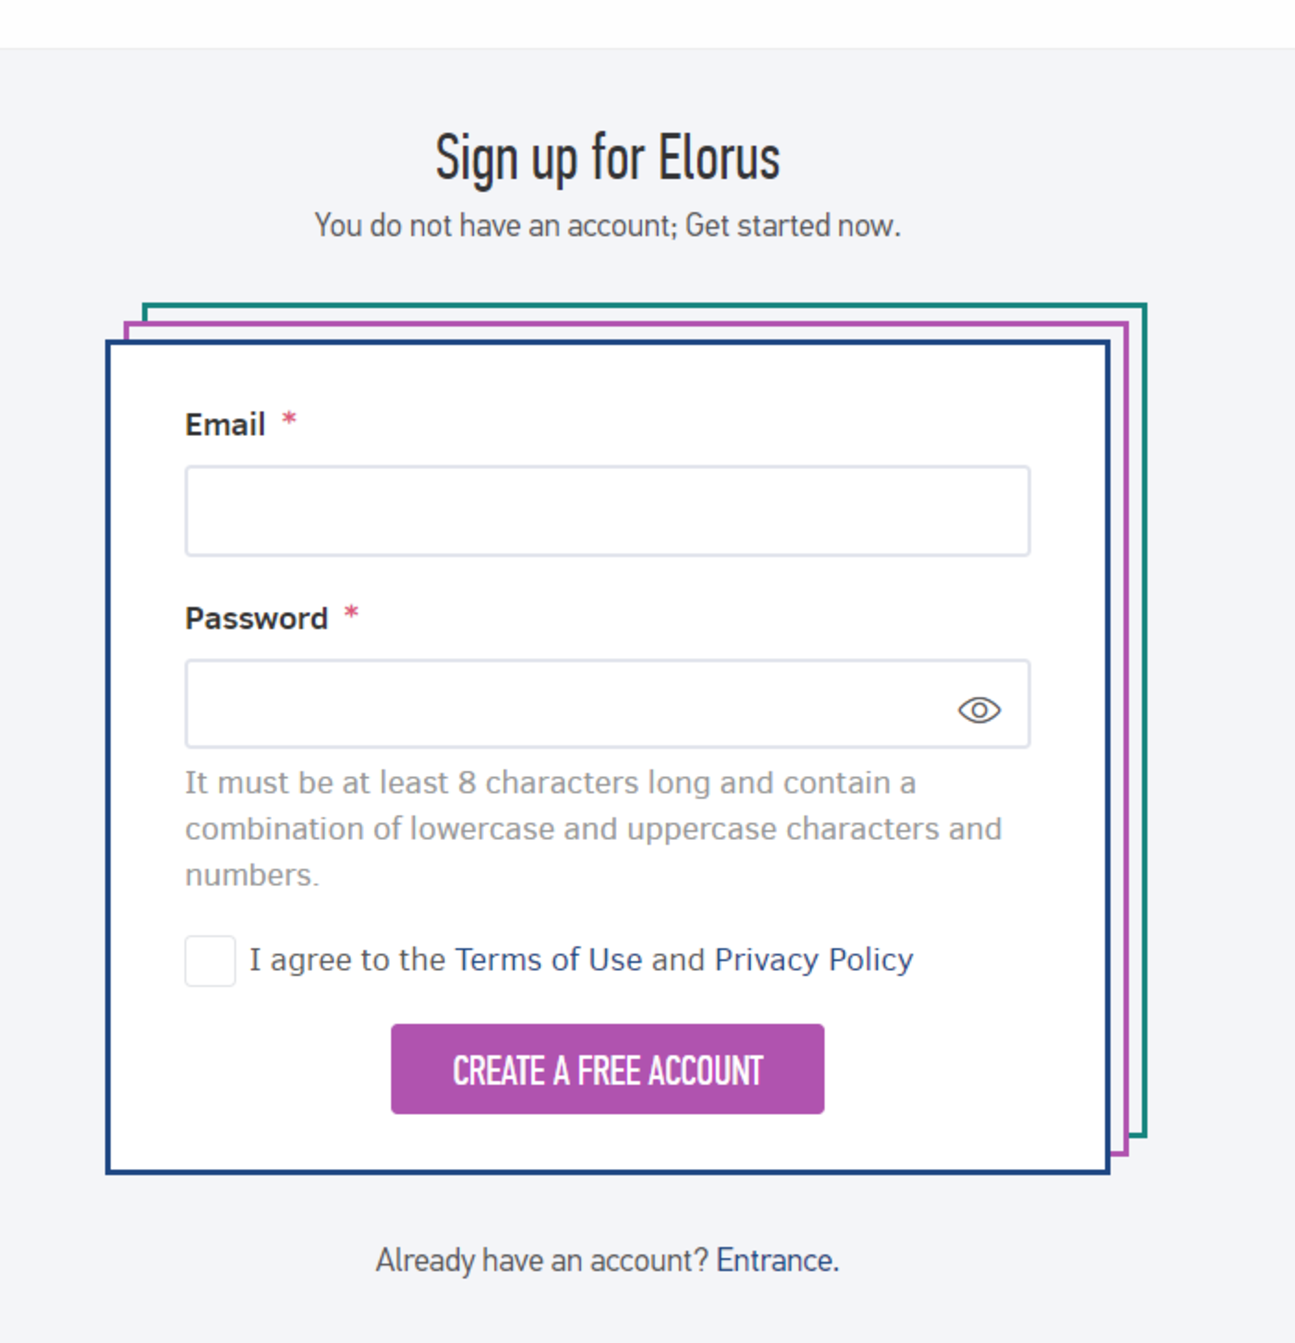 Sign up - Register with Elorus